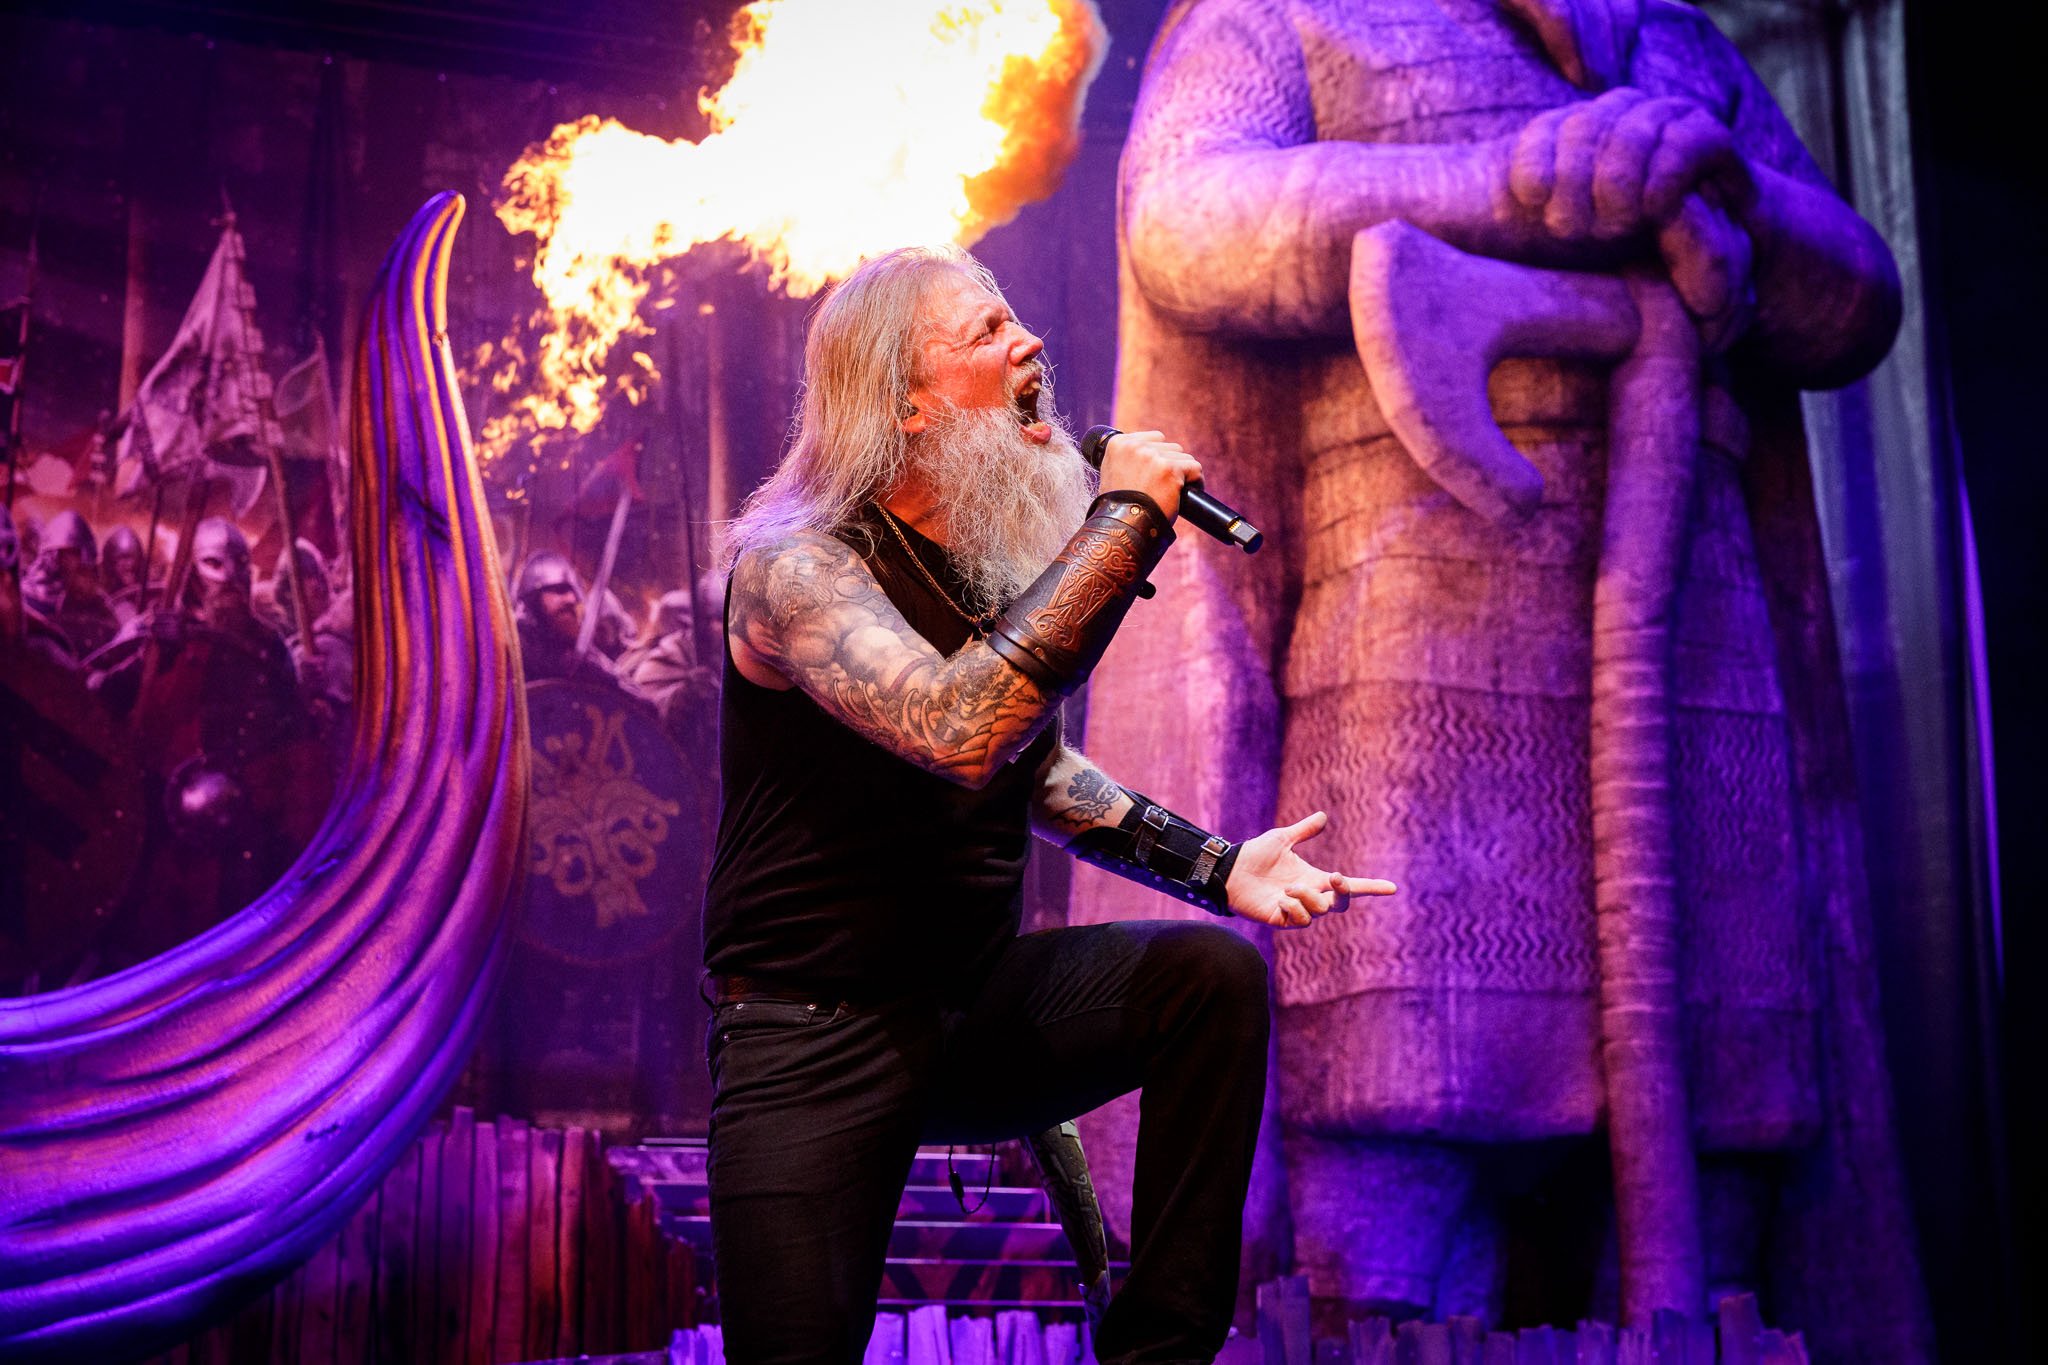 Amon Amarth at the AO Arena in Manchester on September 12th 2022